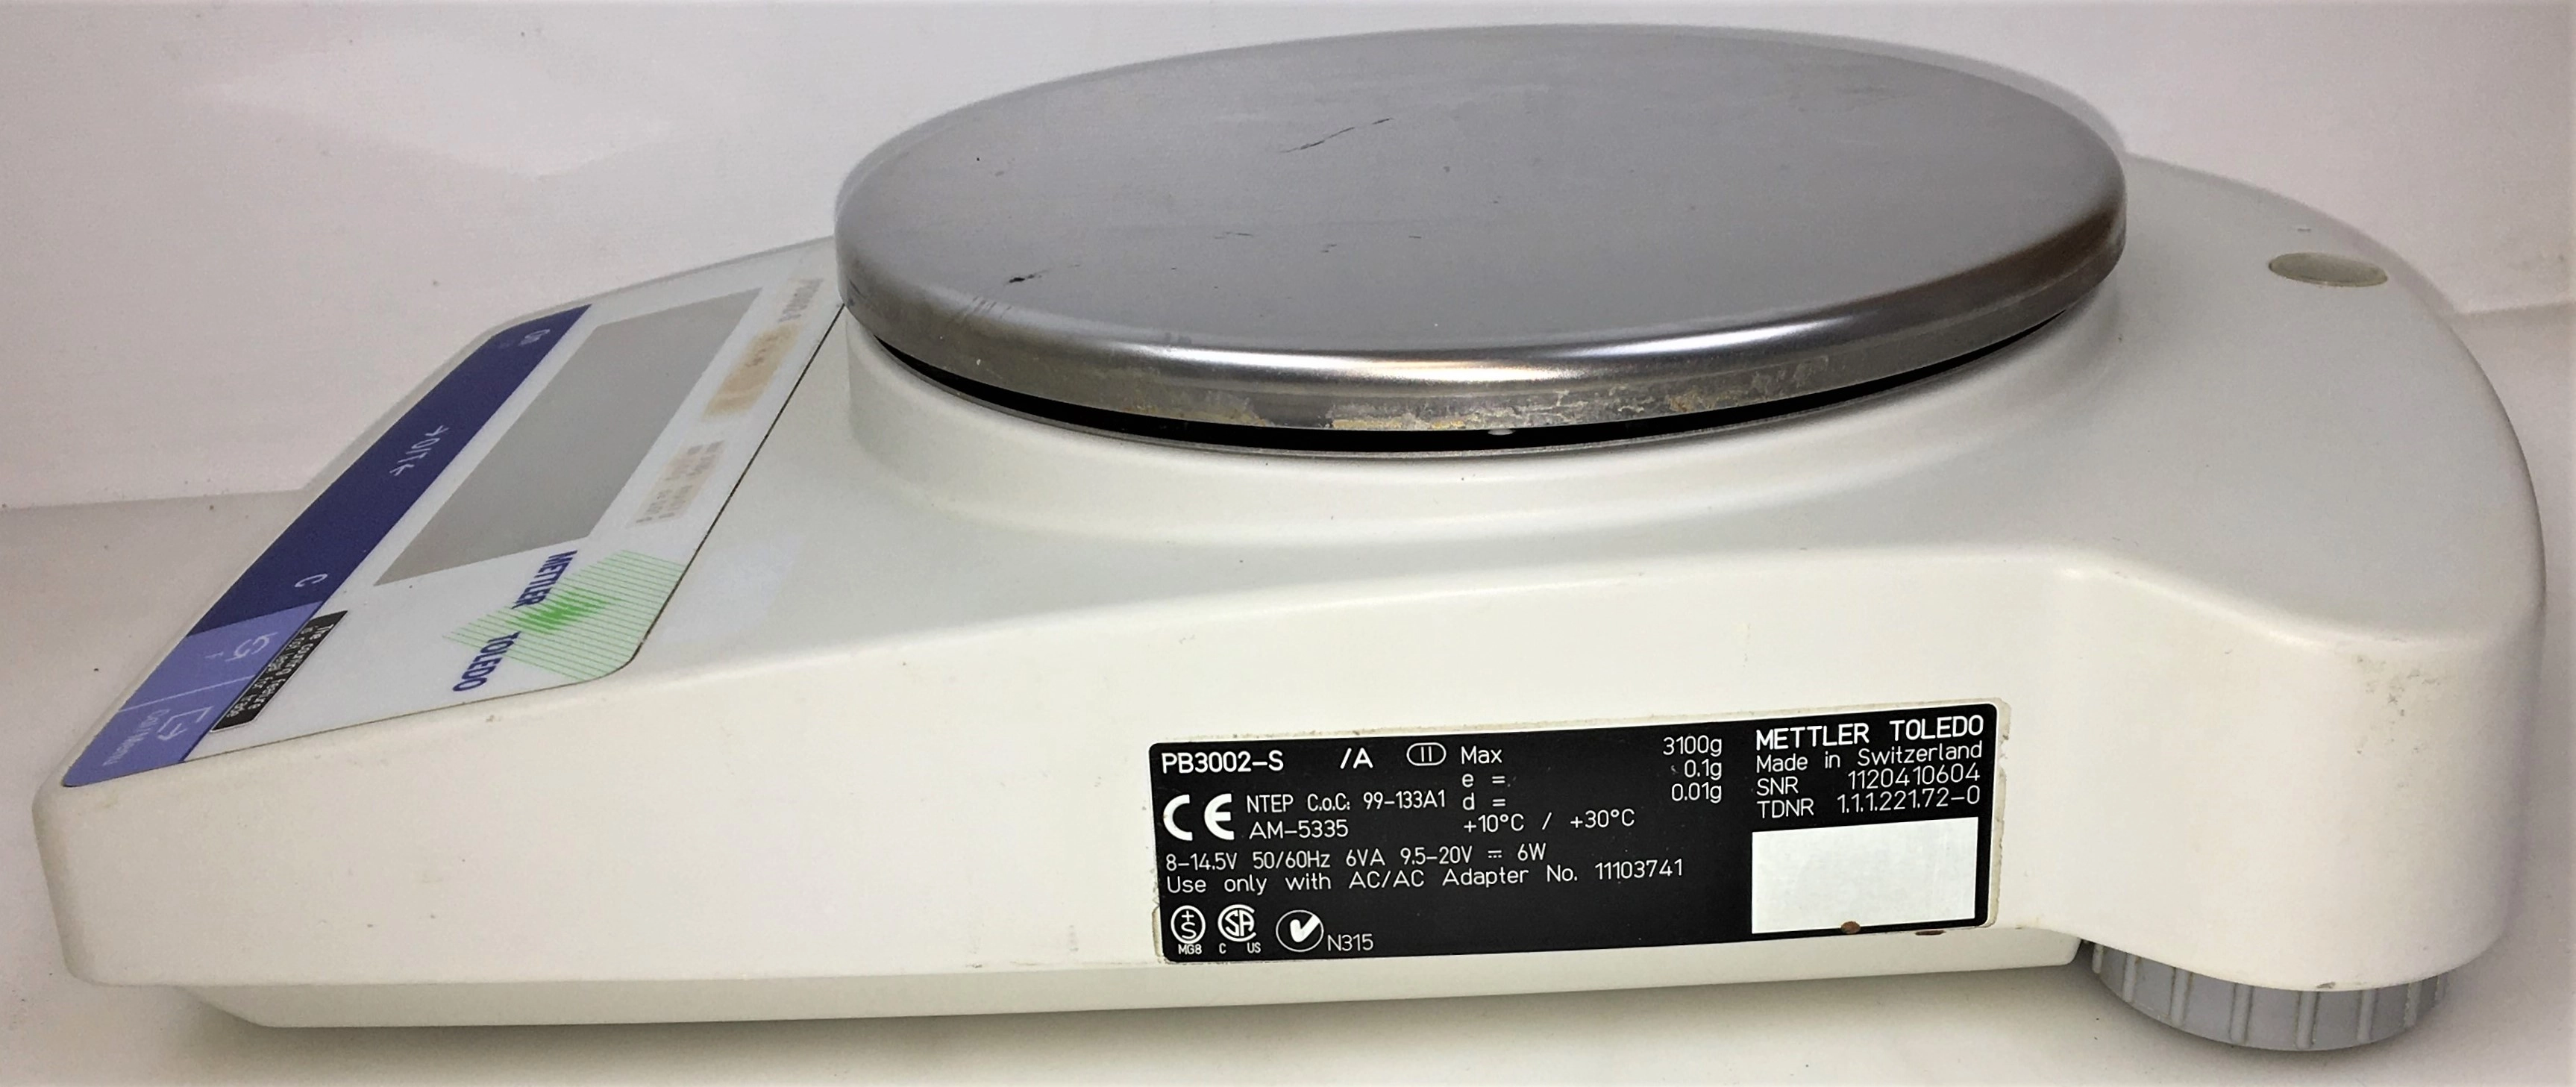 Used Ohaus Adventurer AR3130 Precision Balance - 310g x 0.001g for Sale at  Chemistry RG Consultan